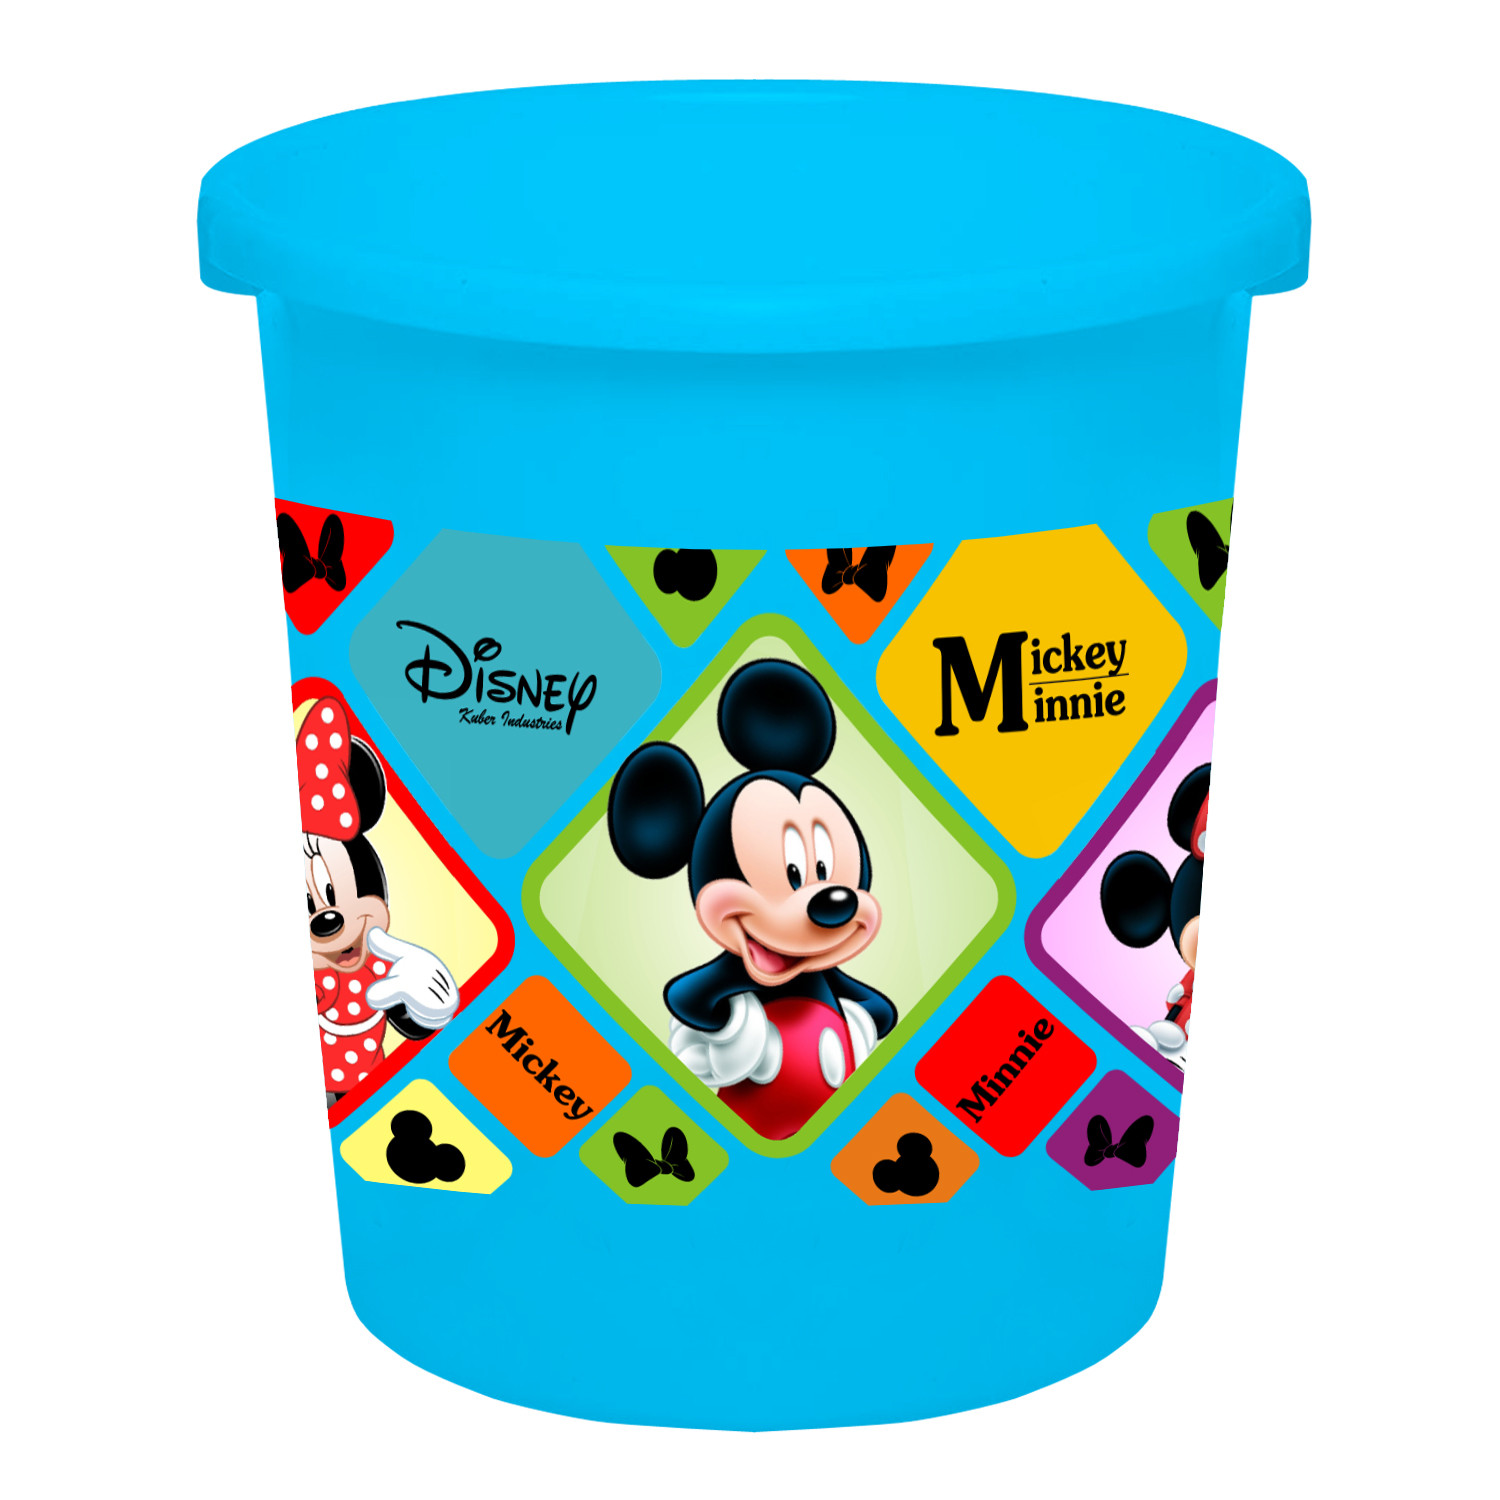 Kuber Industries Disney Mickey Minnie Print Plastic 2 Pieces Garbage Waste Dustbin/Recycling Bin for Home, Office, Factory, 5 Liters (Blue & White) -HS_35_KUBMART17801